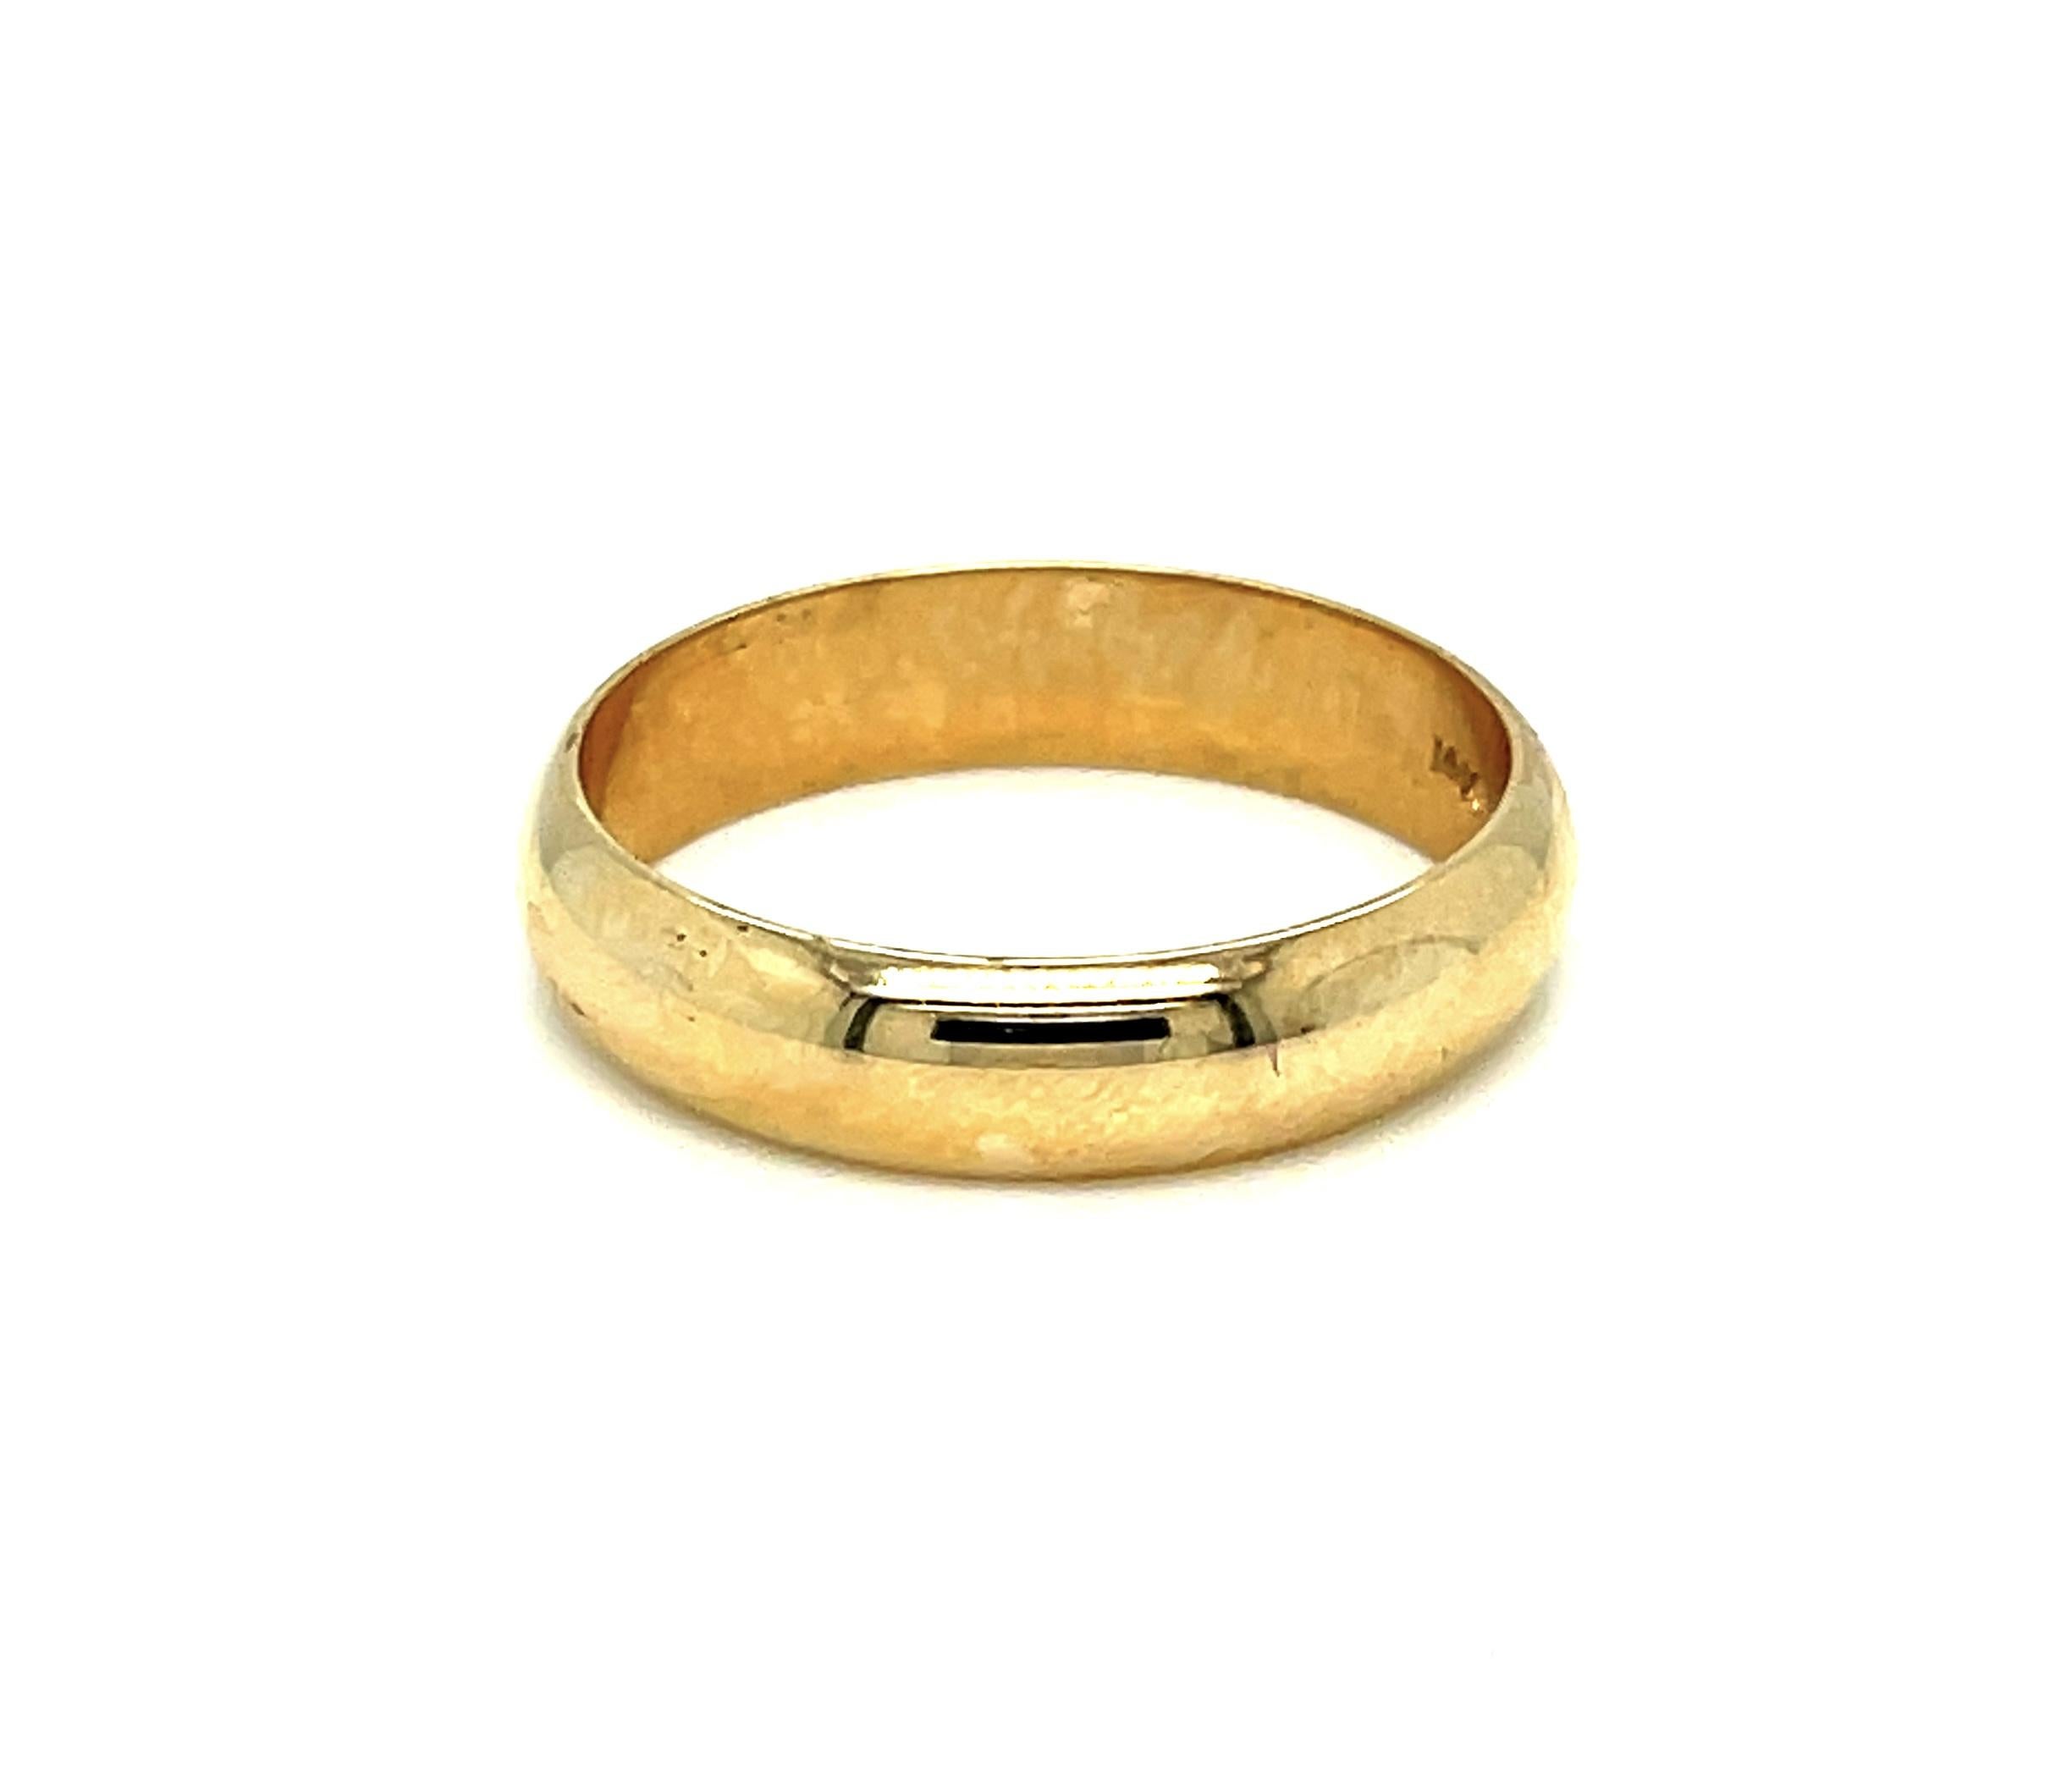 Classic Wedding Band

Set in 14K Yellow Gold

5mm

Size 9.25

Weight: 4.90 grams

Pre-owned
